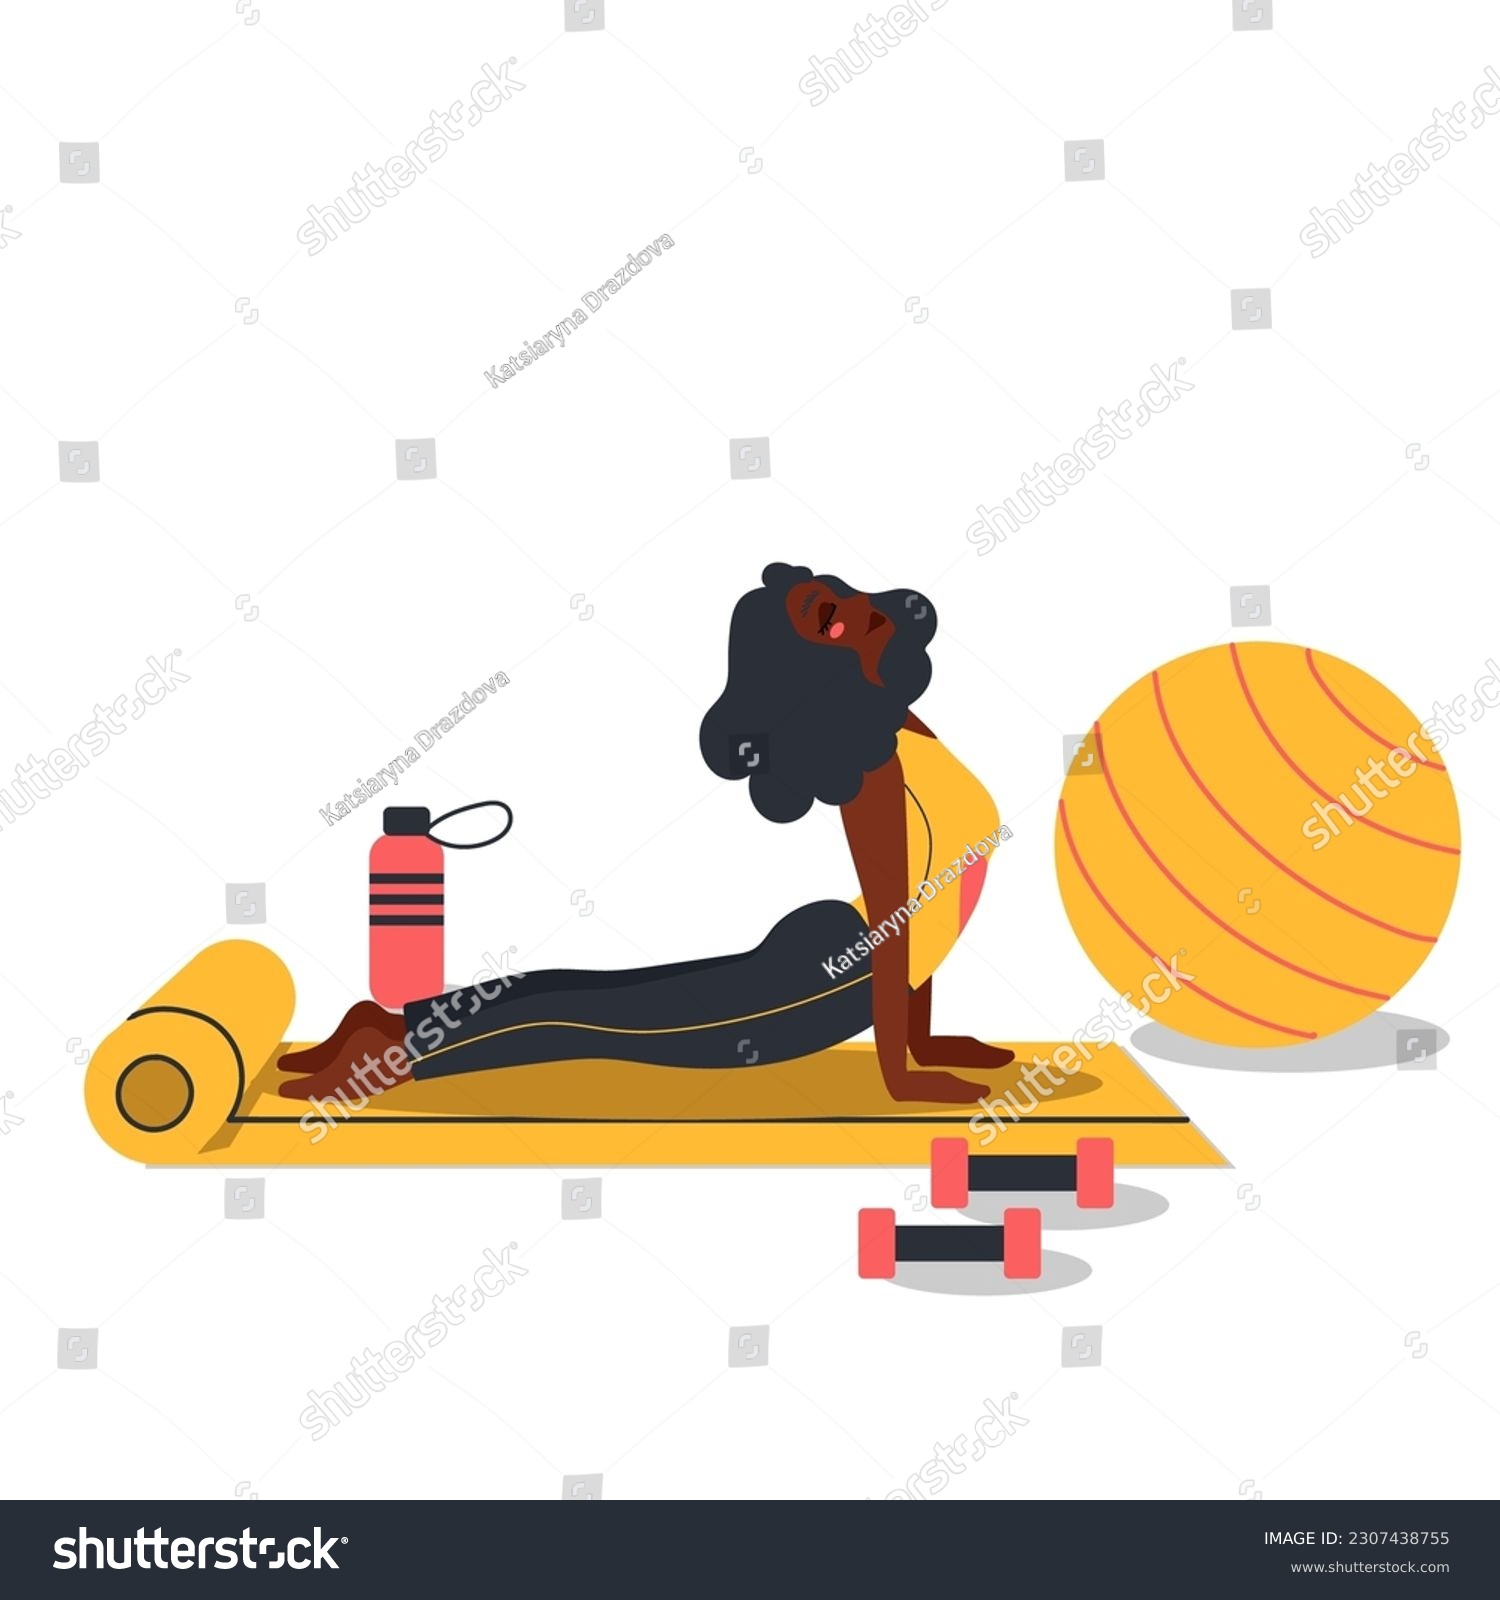 SVG of woman doing yoga exercises. Happy person practicing stretching workout, training on mat indoors. Fashion illustration by femininity, beauty, and mental health. Feminine cartoon illust svg